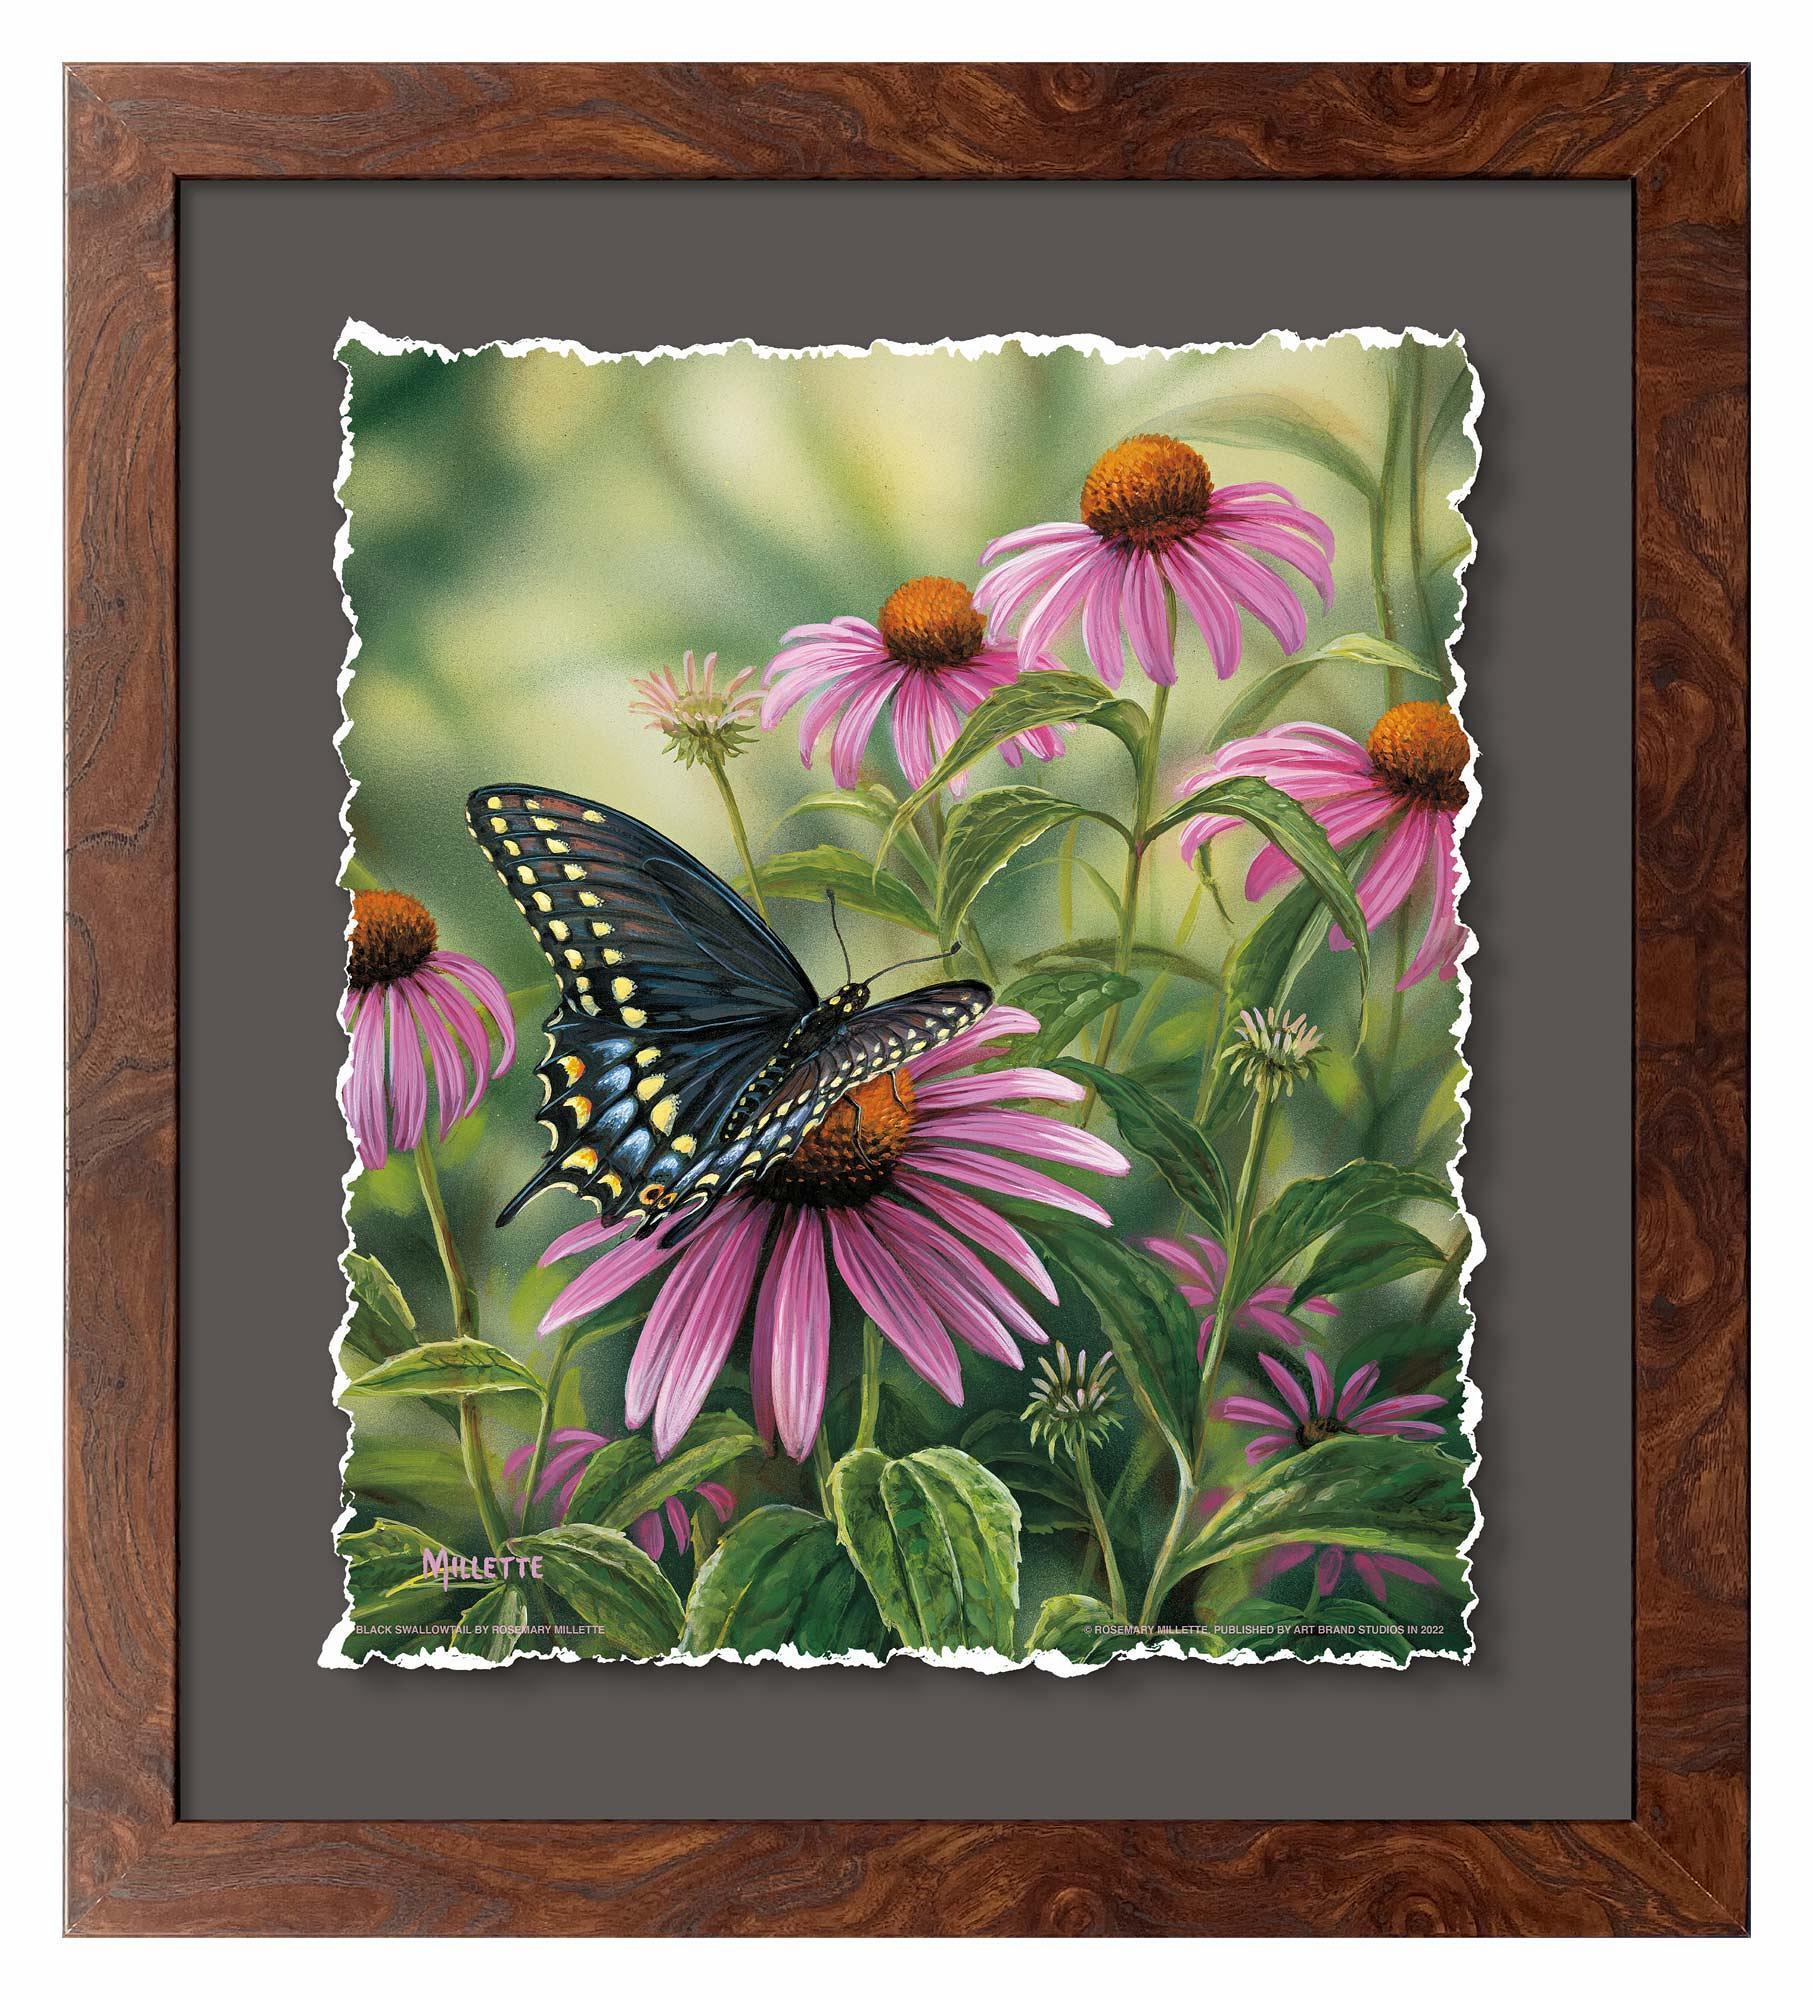 Black Swallowtail Butterfly Deckled Edge Paper Print - Wild Wings